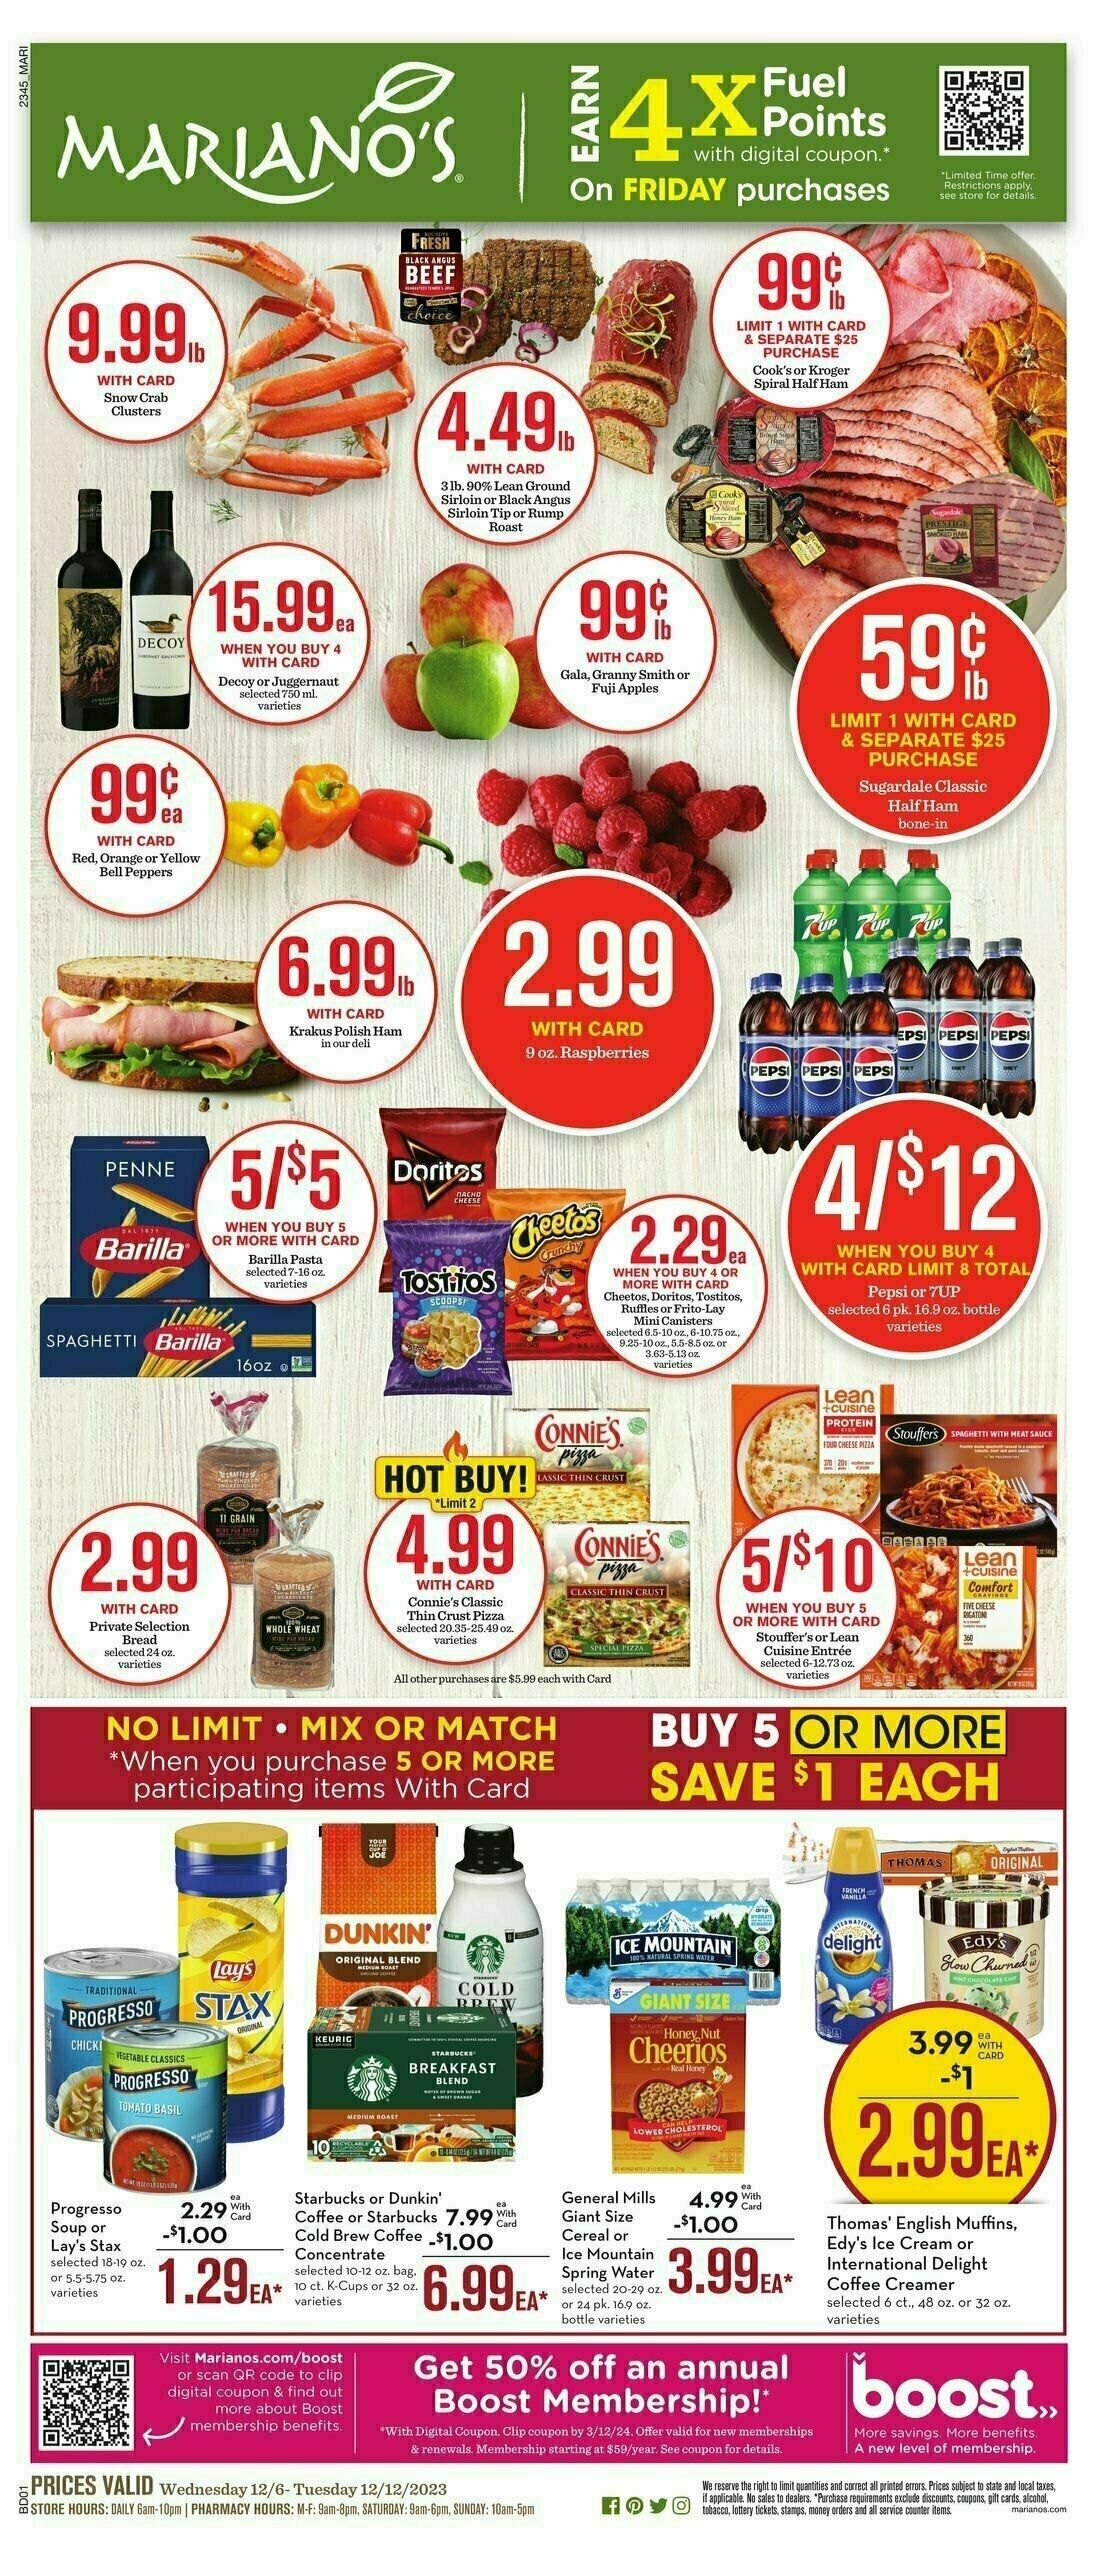 Mariano's Weekly Ad from December 6